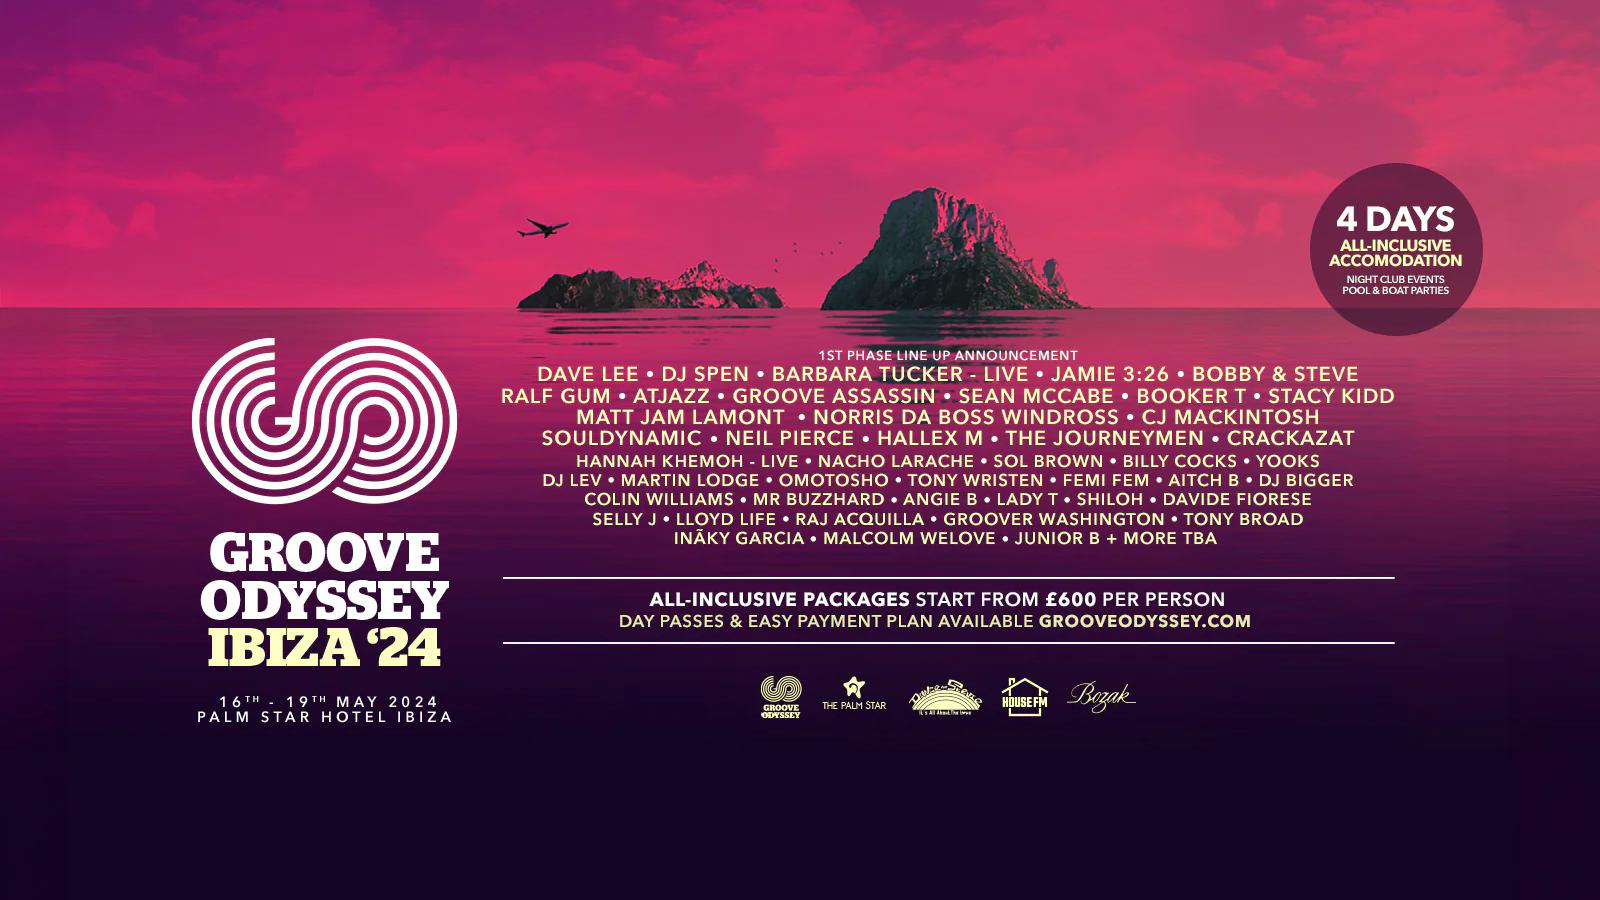 Groove Odyssey host a splendid 4 day event on the glorious island of Ibiza